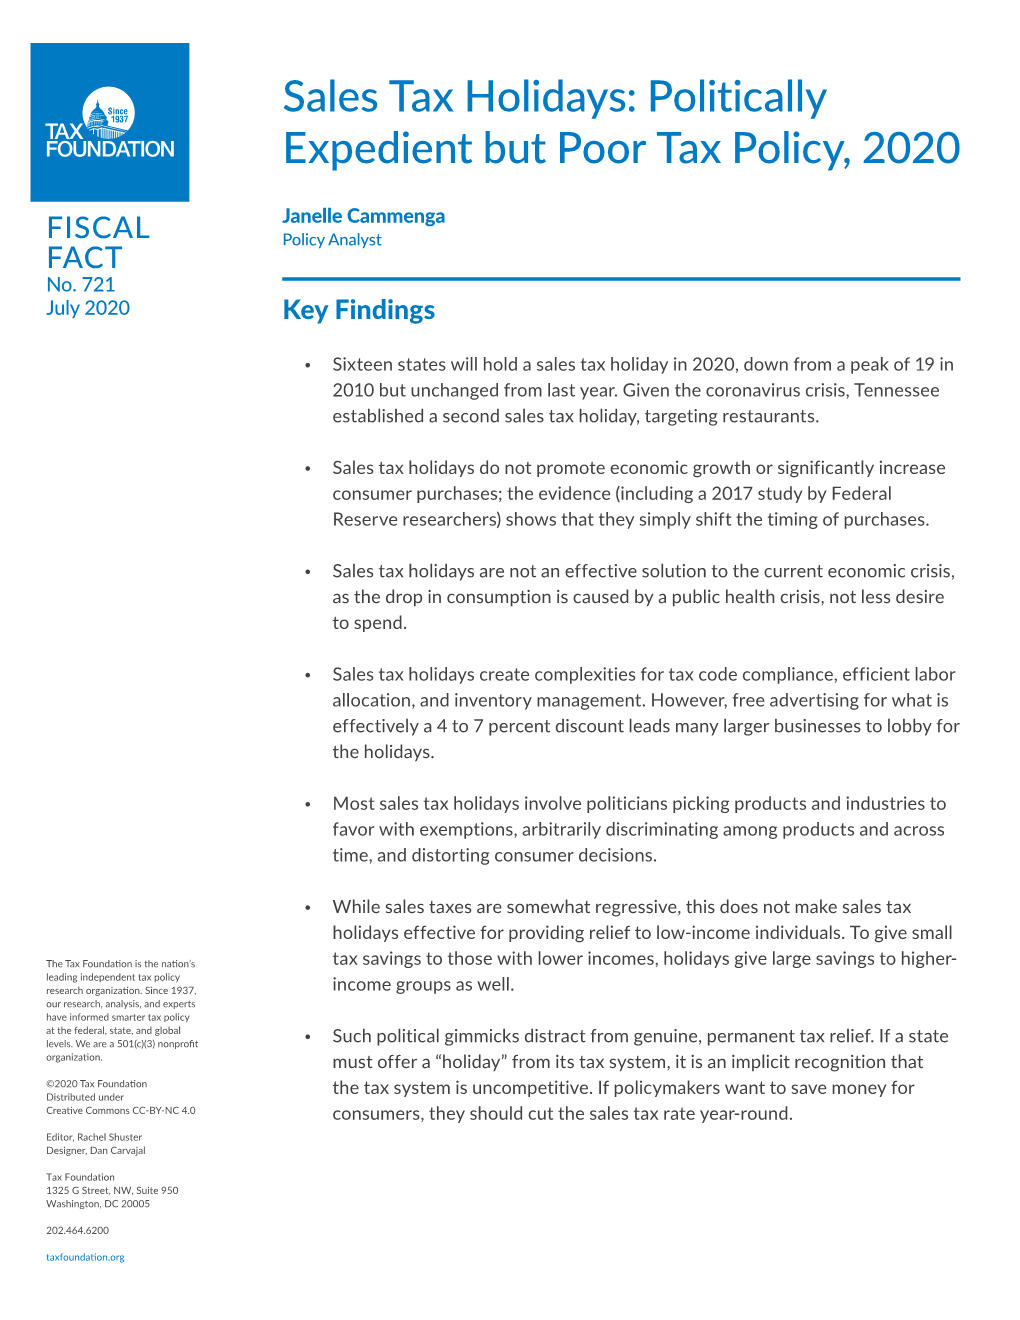 Sales Tax Holidays: Politically Expedient but Poor Tax Policy, 2020